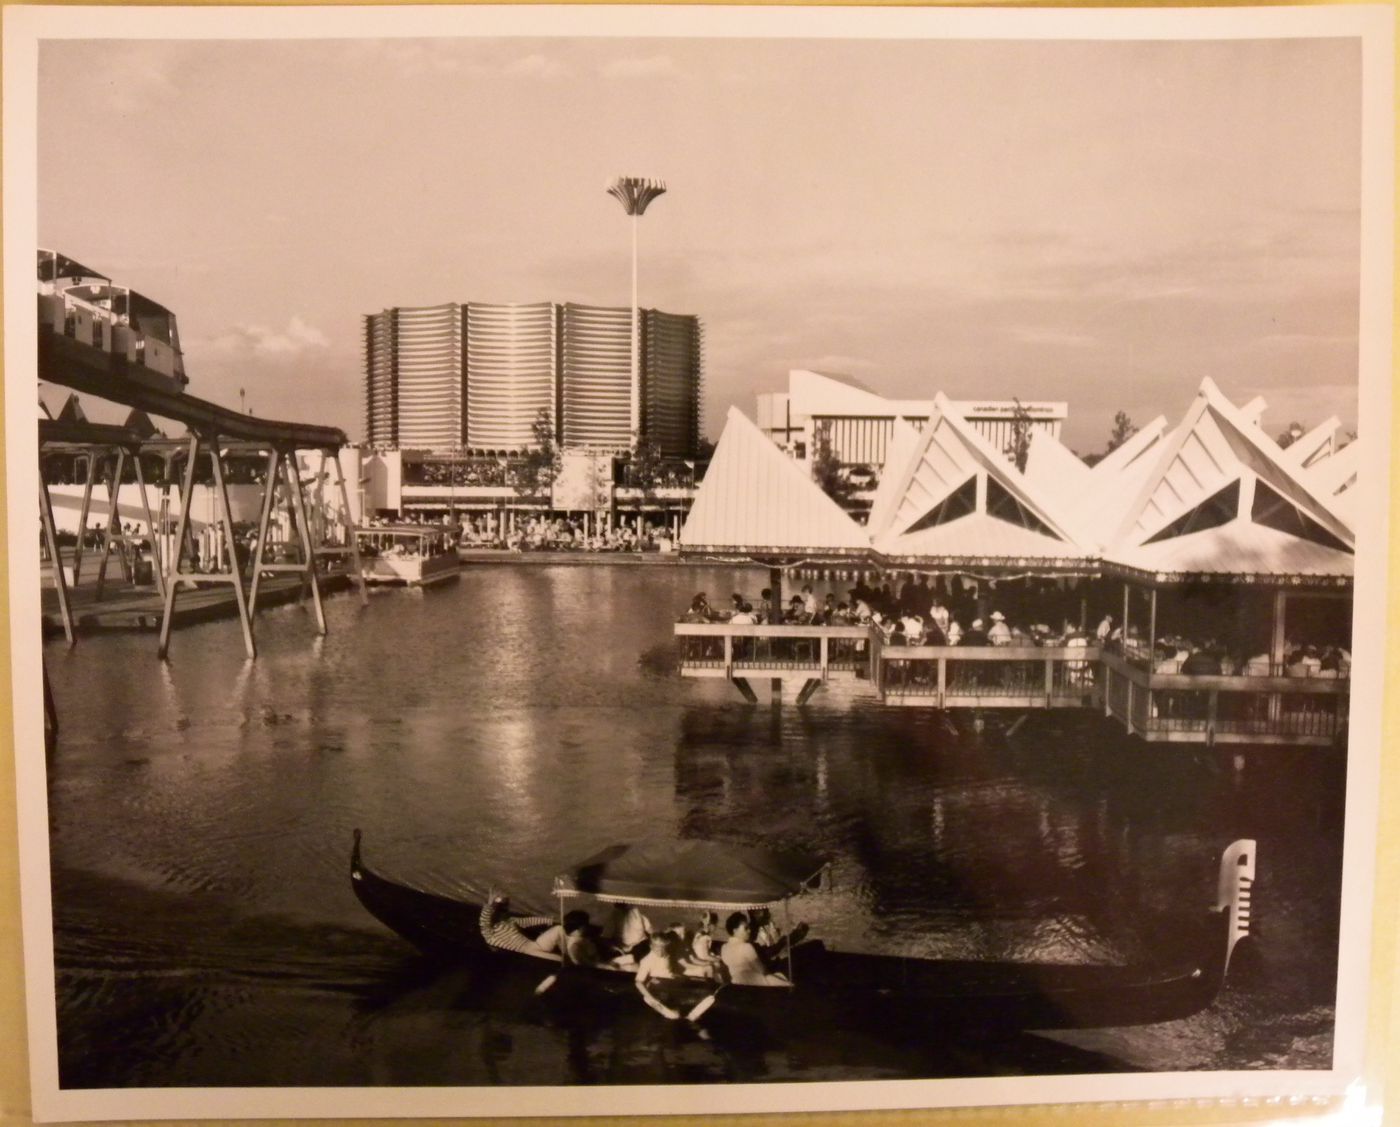 View on a waterway with a gondola in foreground and the Canadian Pacific-Cominco Pavilion in background, Expo 67, Montréal, Québec